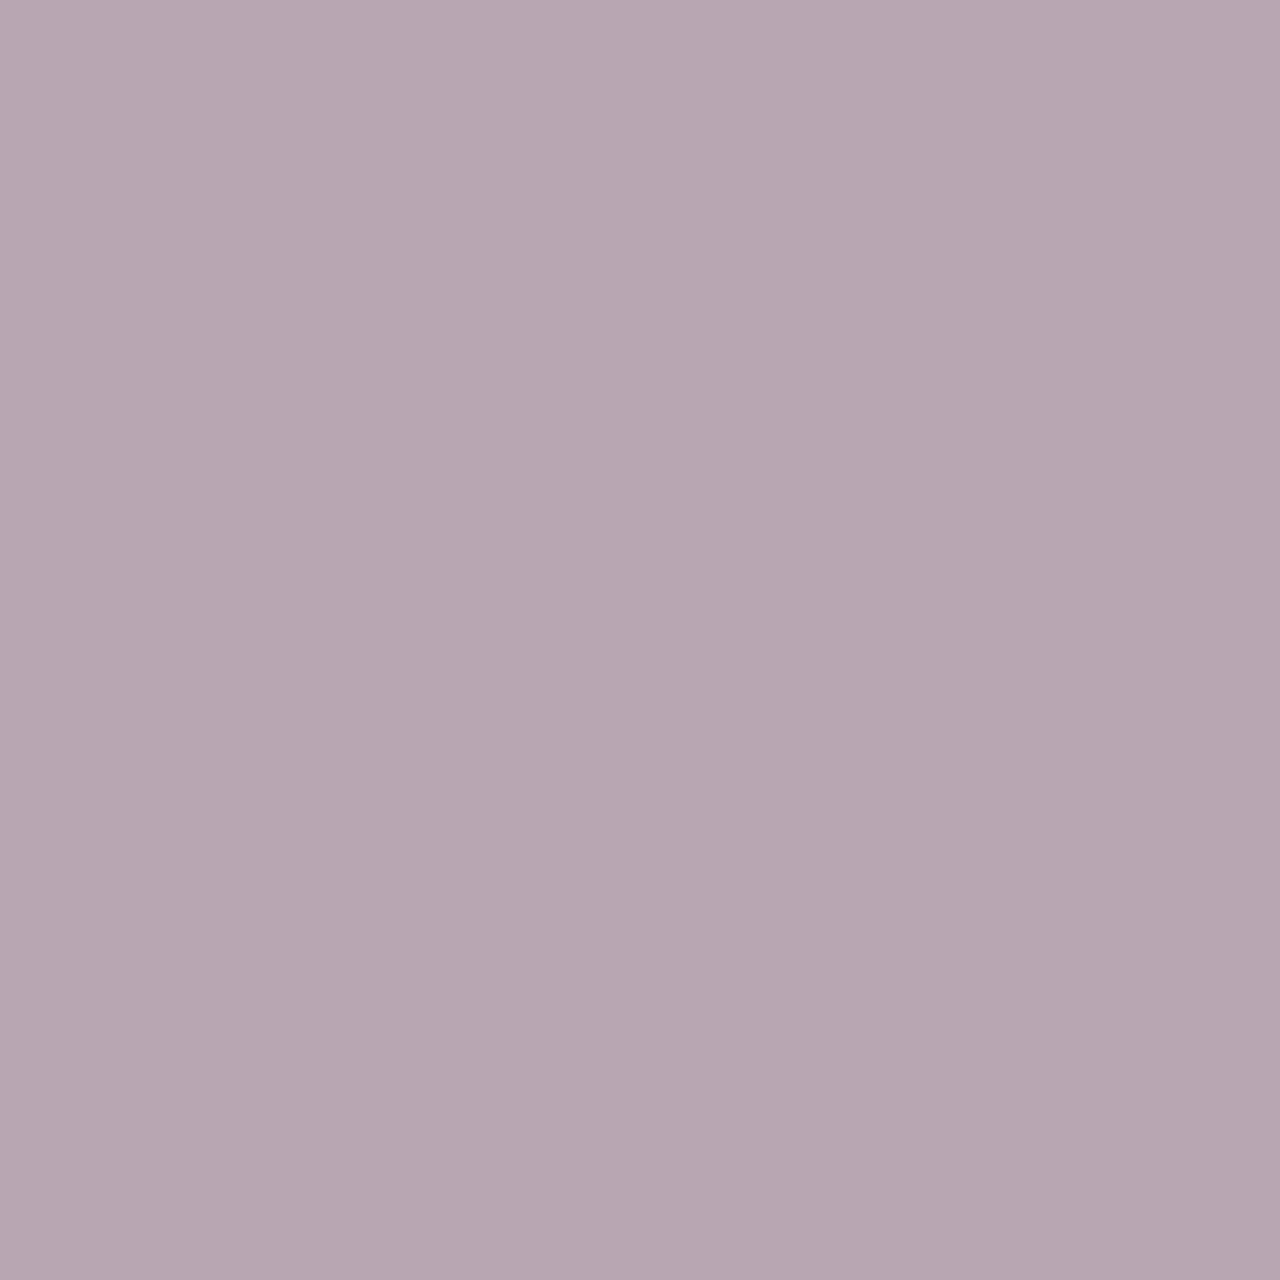 Wisteria 121-107 PBS Fabrics Painter's Palette Solids collection